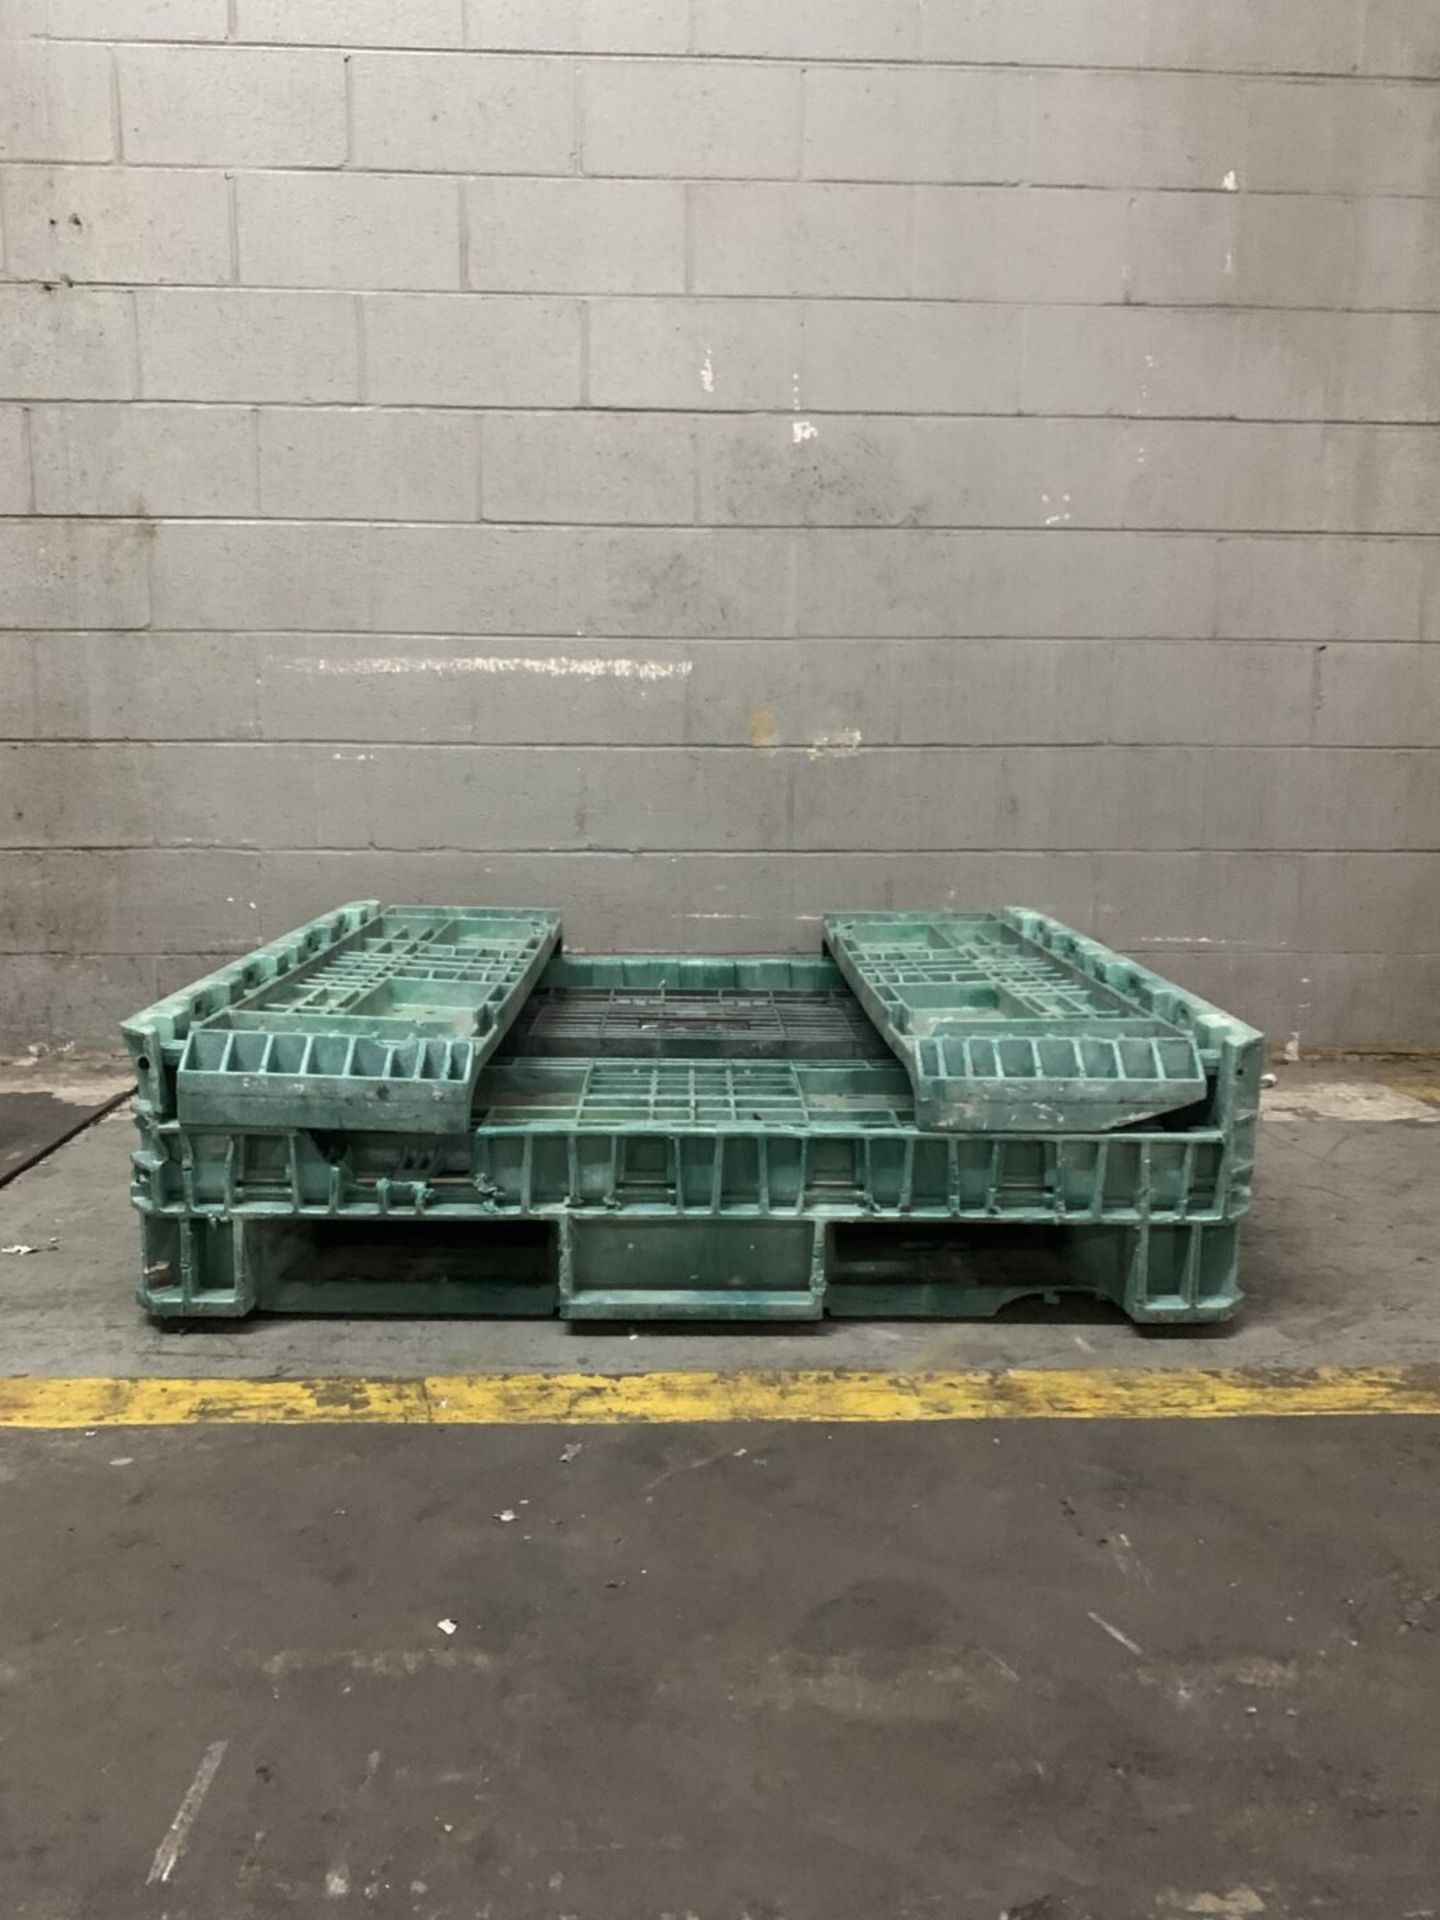 Lot of (8) Plastic Knockdown Shipping Crate - Image 2 of 8